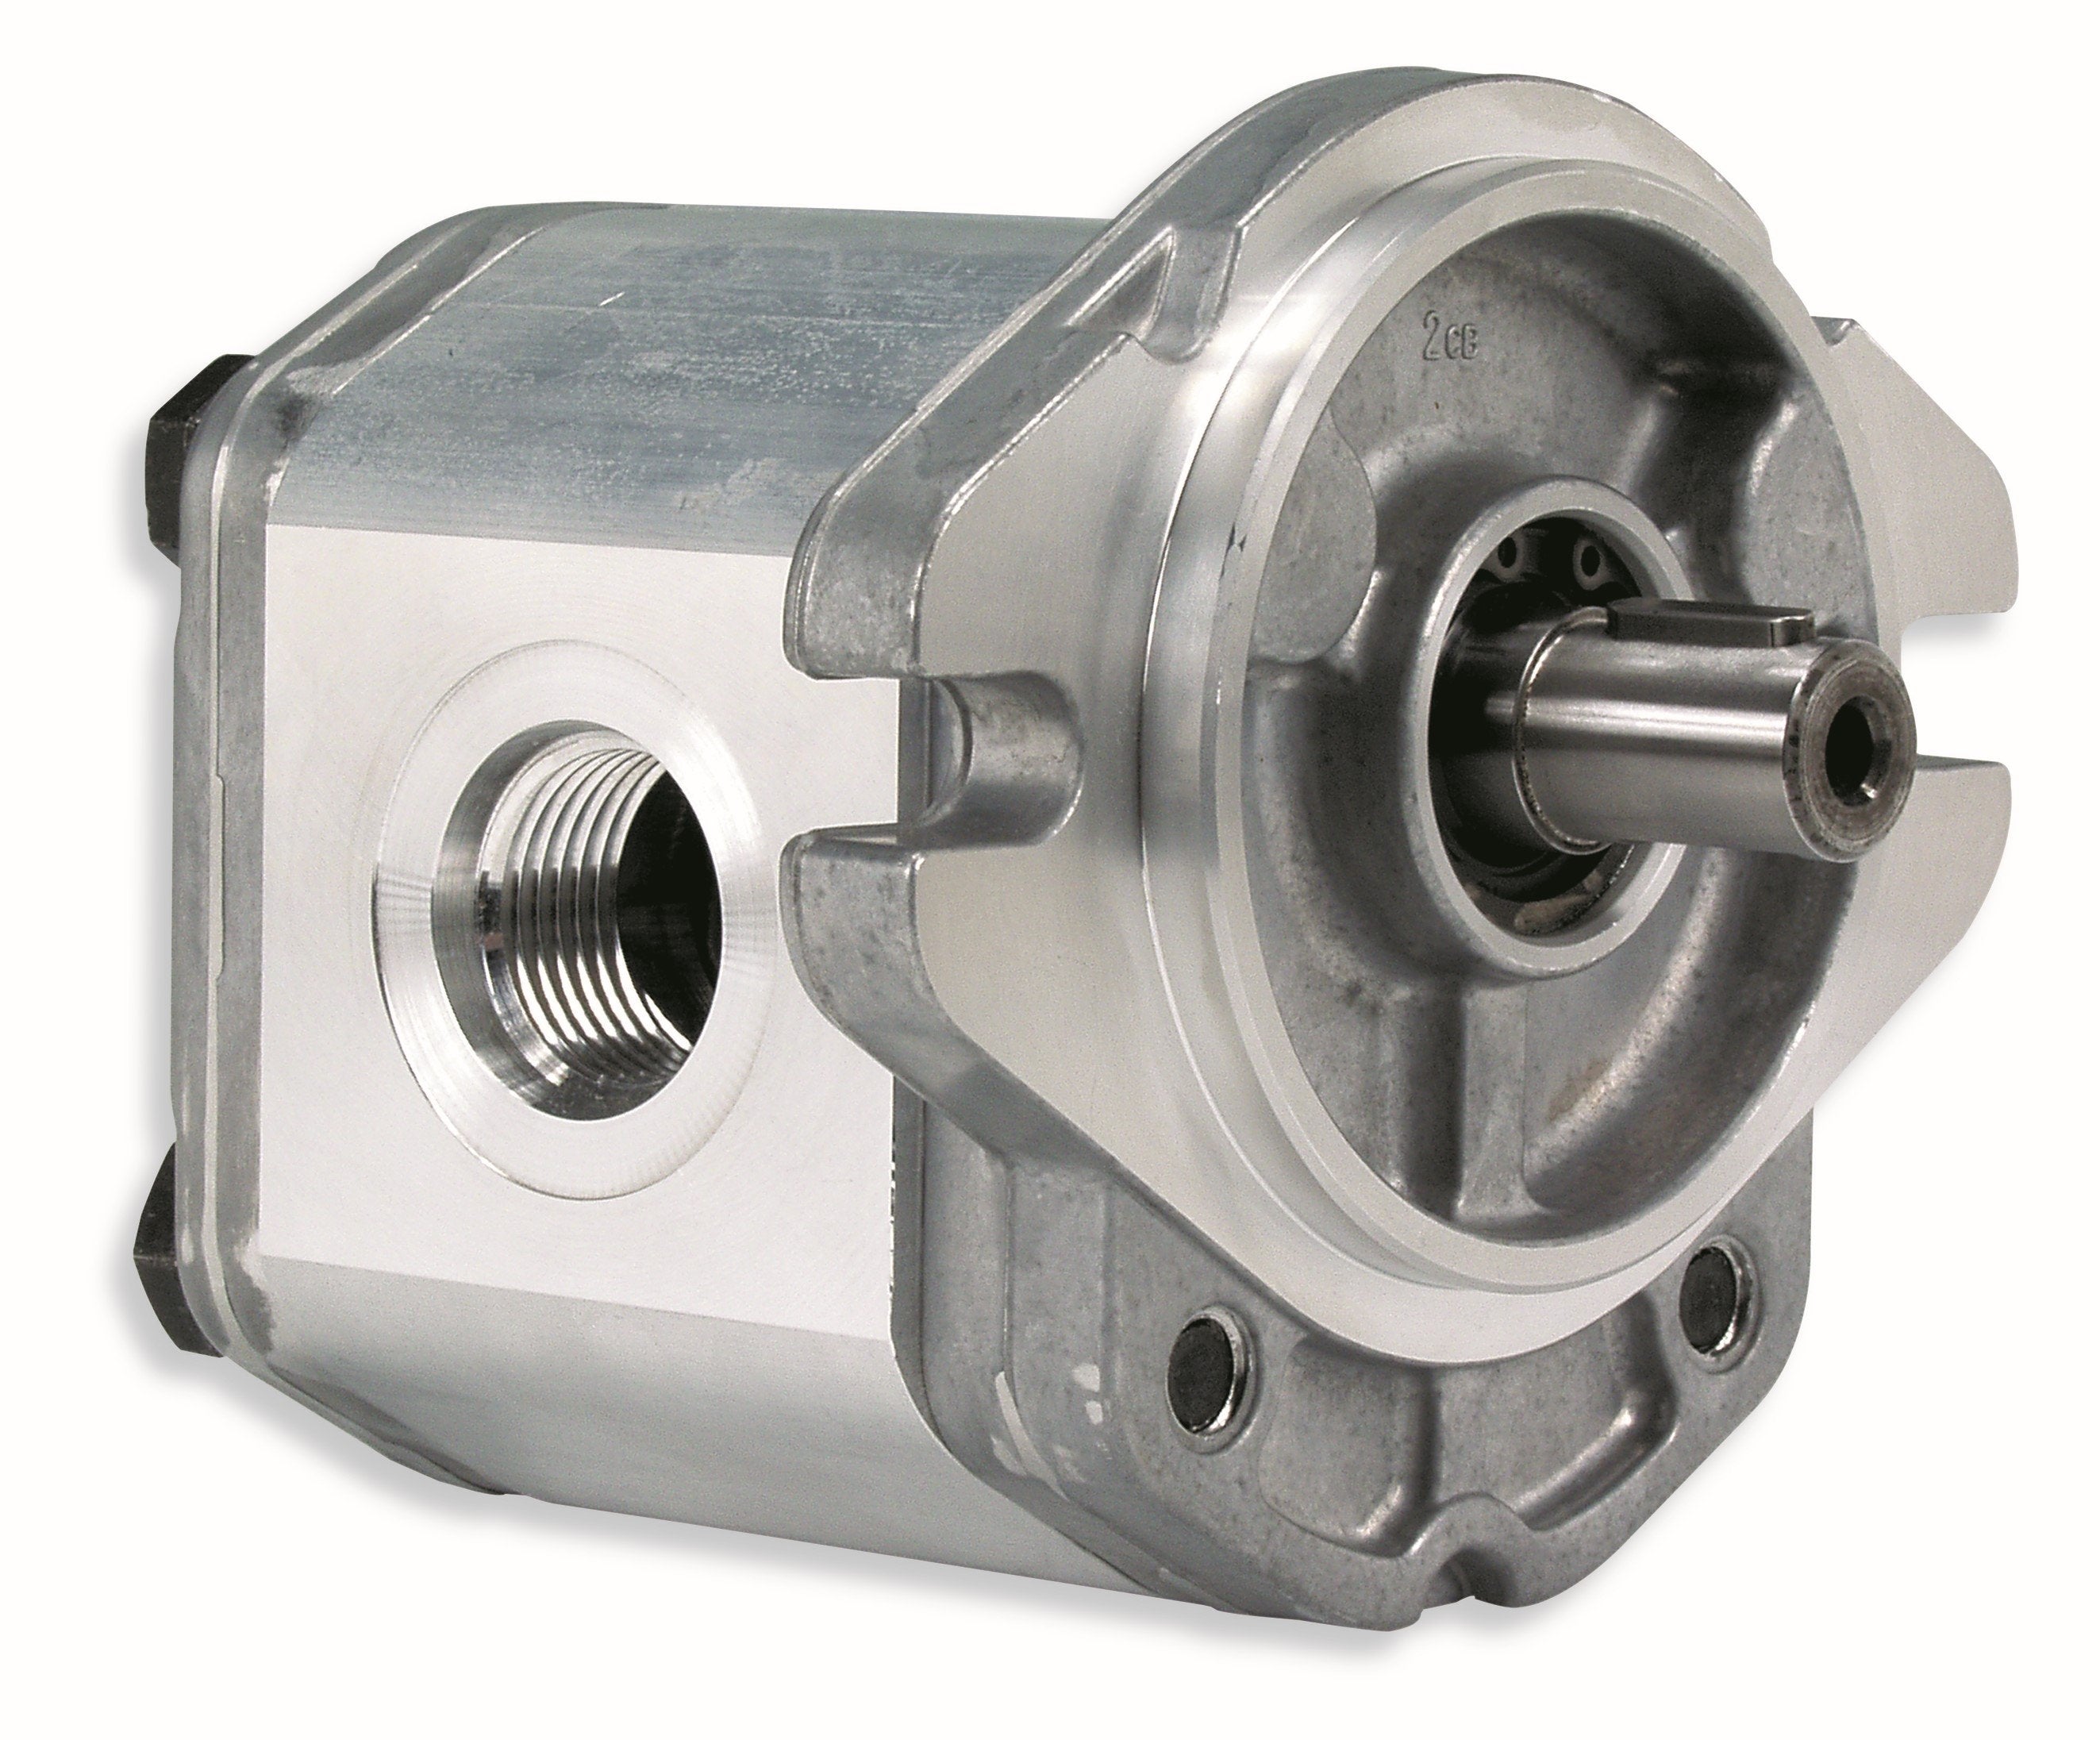 GHM3A-R-60-S1-FA-E4 : Marzocchi Gear Motor, Bidirectional, 39cc, 3770psi rated, 3000RPM, 1.25" #20 SAE ports, 13T 16/32DP Splined Shaft